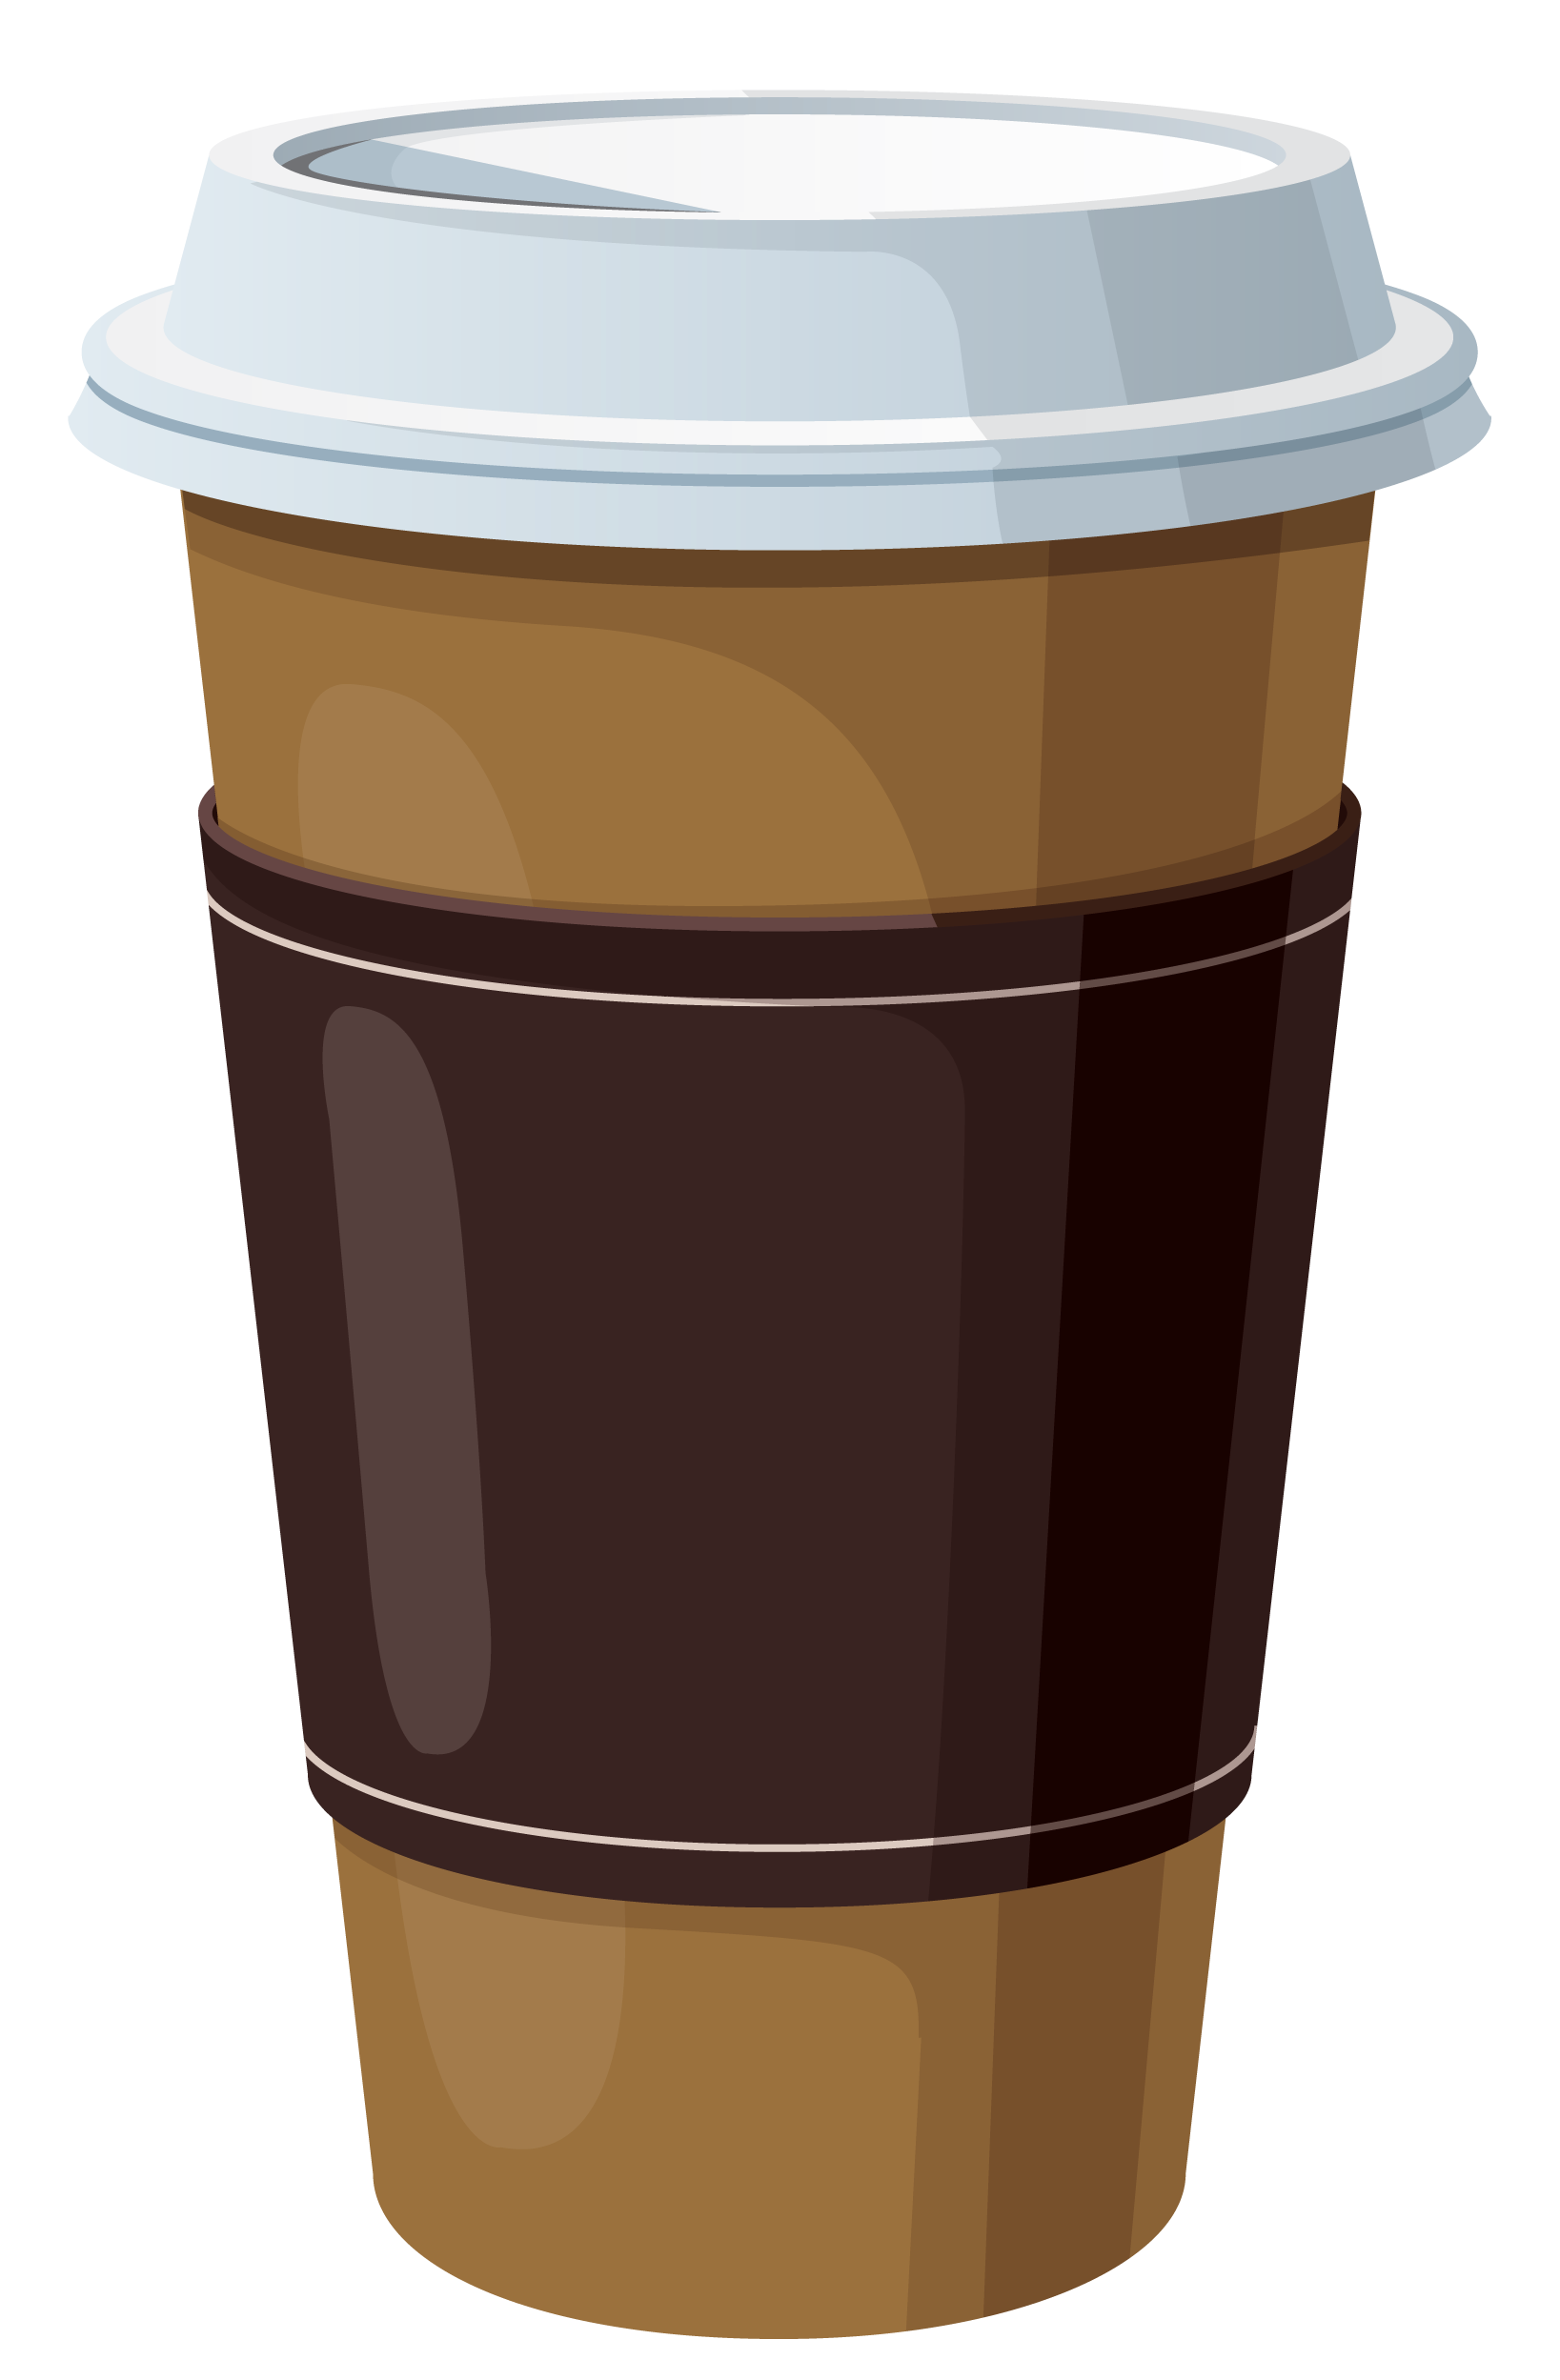 Vintage coffee cup clipart cliparthut free clipart